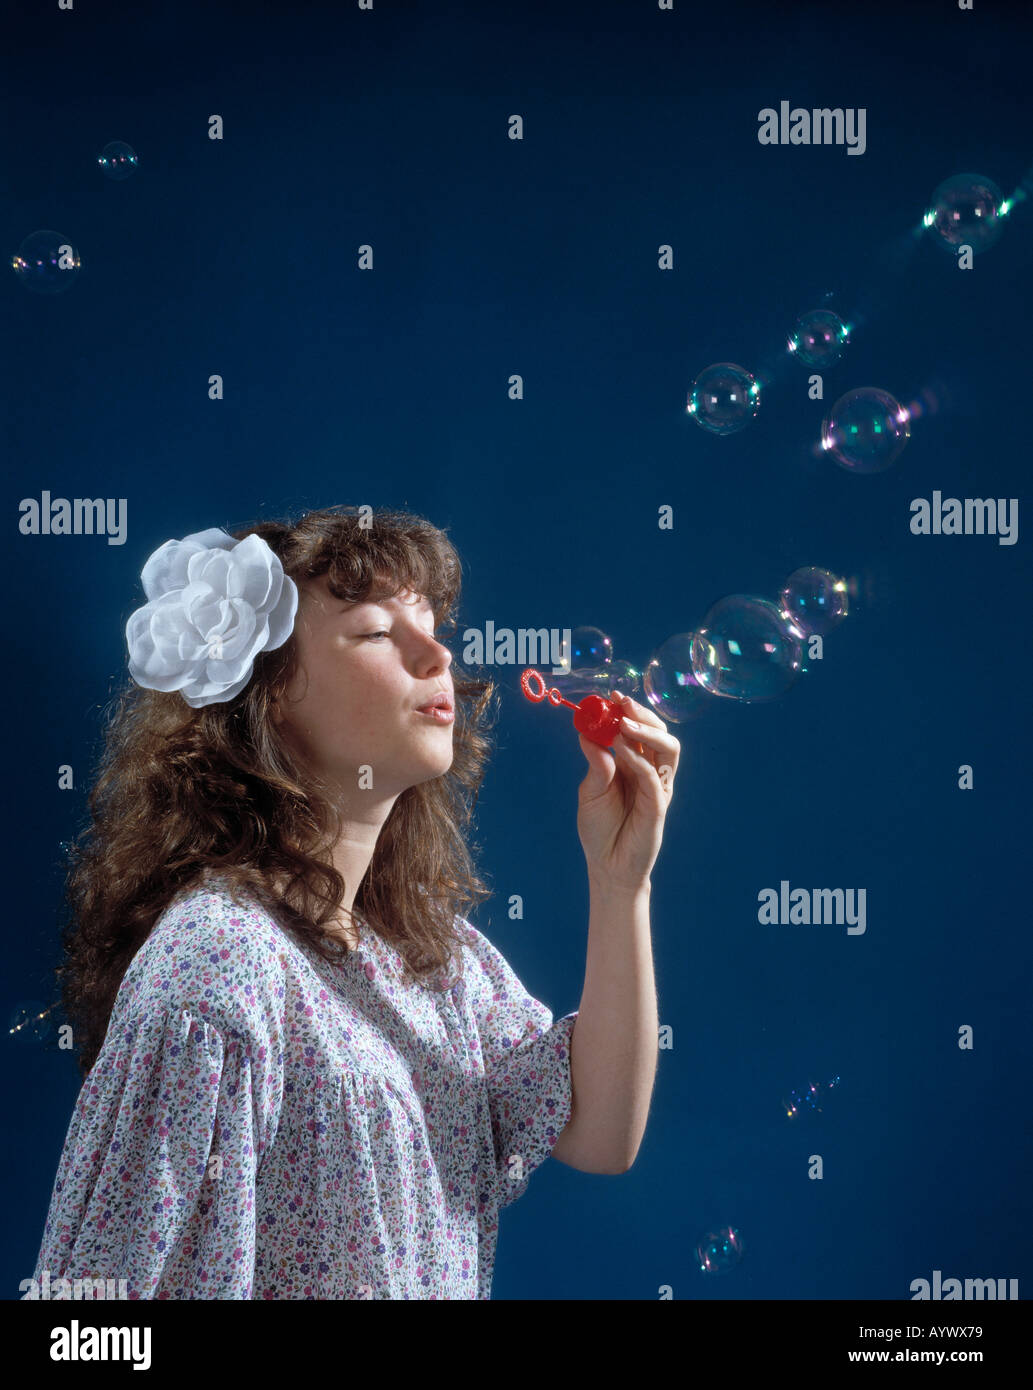 girl, soap bubbles, Babette, people, woman, women, youth, youths, young person, young persons Stock Photo